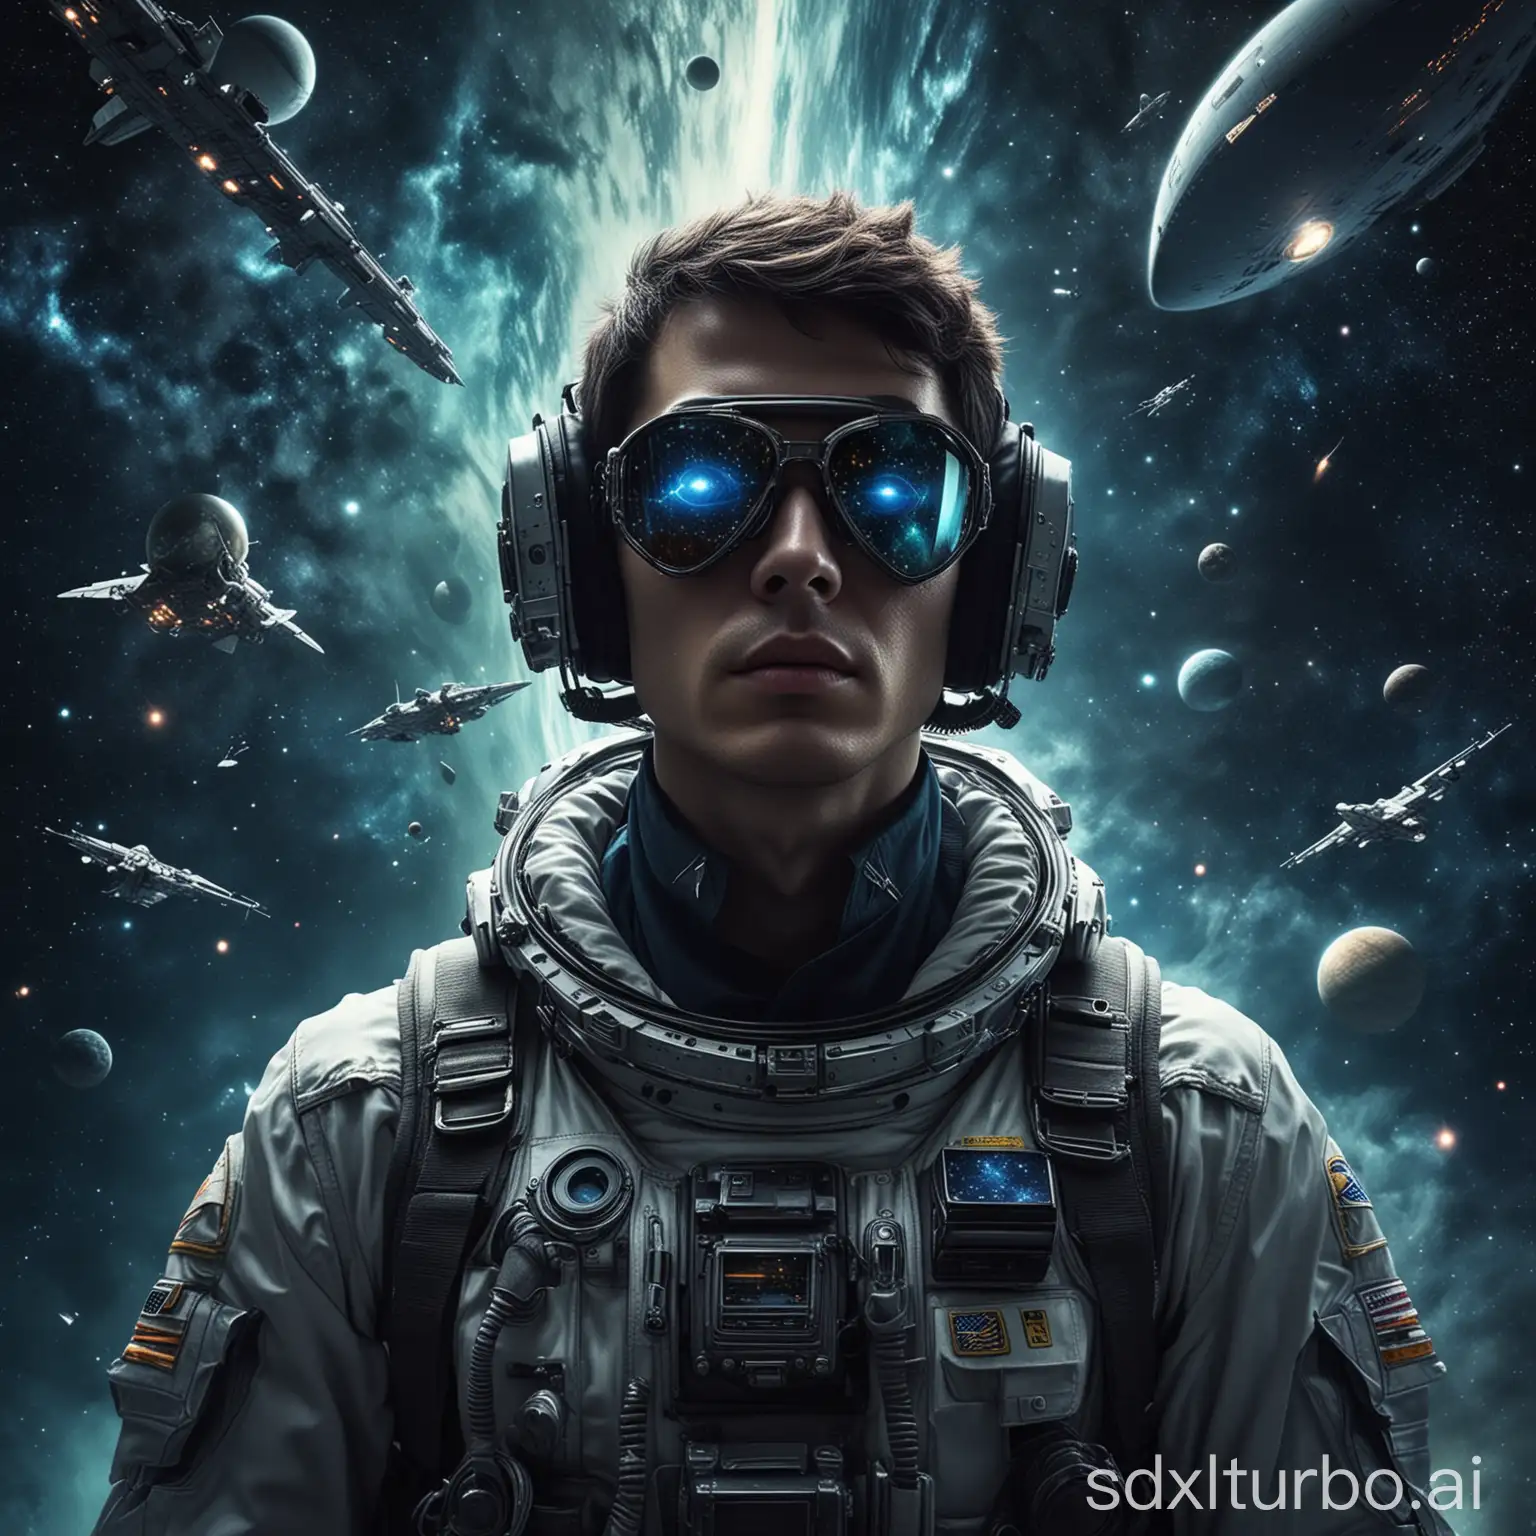 Alien-themed Gothic style Create an artwork with the theme of a surreal male future retro navy soldier sailor astronaut traveling through interstellar alien space, showing the unique effects of fantastic interstellar phenomena and special glasses. He is surrounded by cosmic wonders, nebulae rotate, planets float, creating a surreal journey through the starry sky, the Fujian ship looks like an interstellar aircraft carrier battleship, flying in the sea of ​​stars.